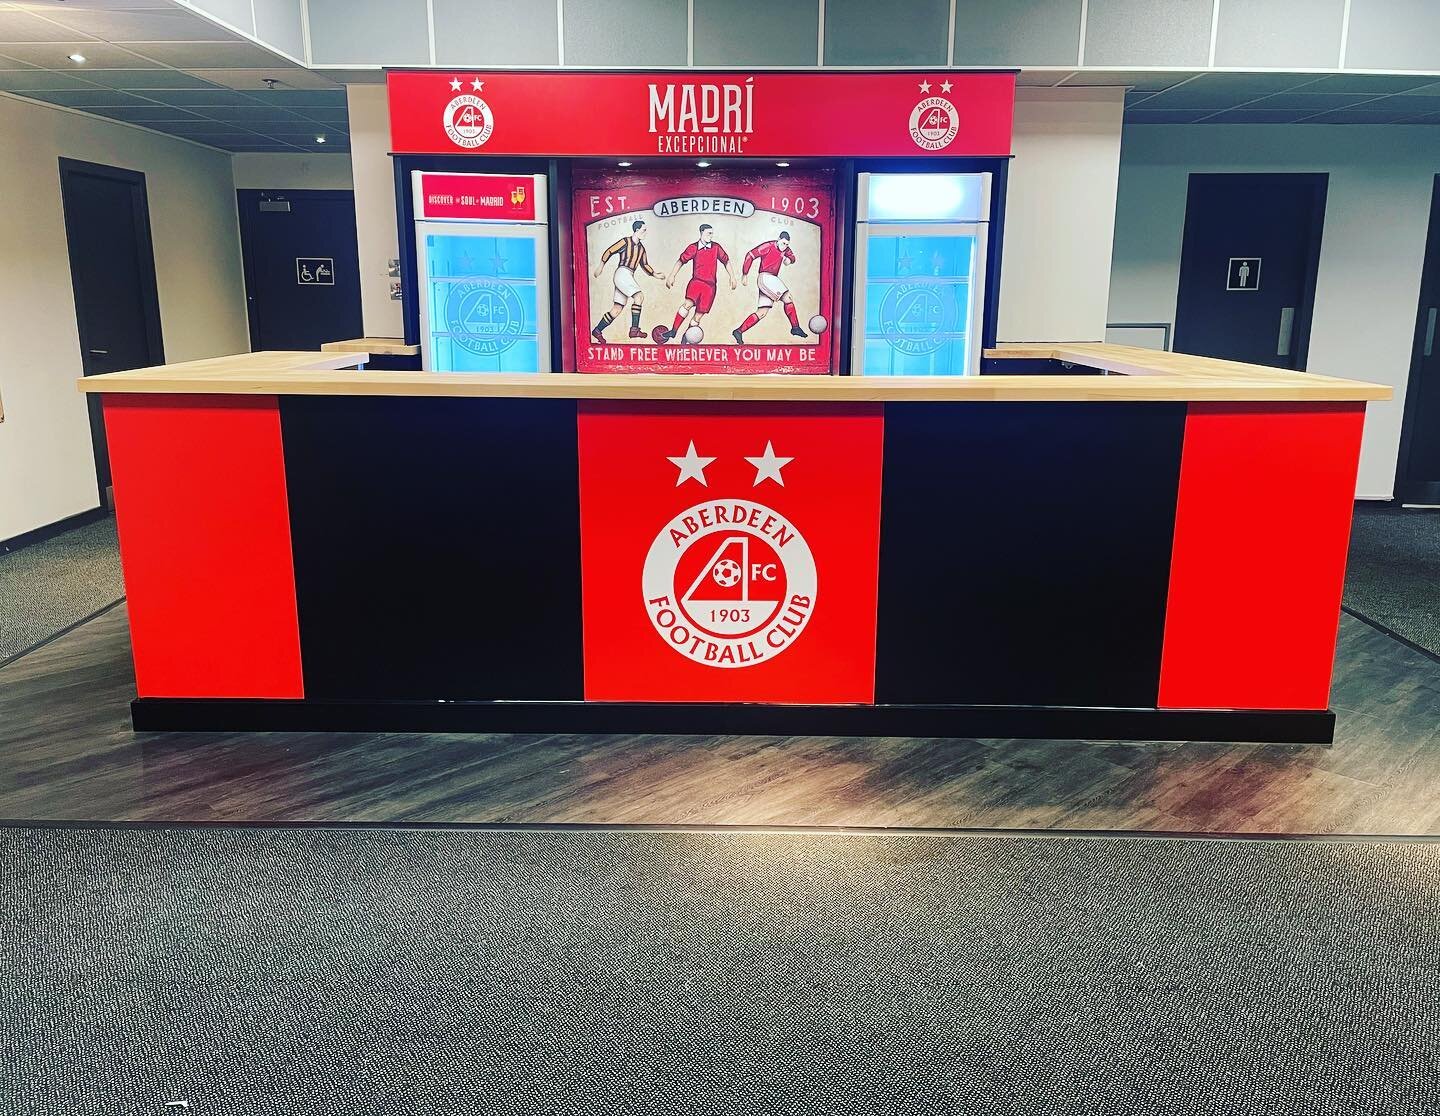 A new permanent bar which we designed and installed for Aberdeen Football Club and Madri Excepcional! @madriexcepcional